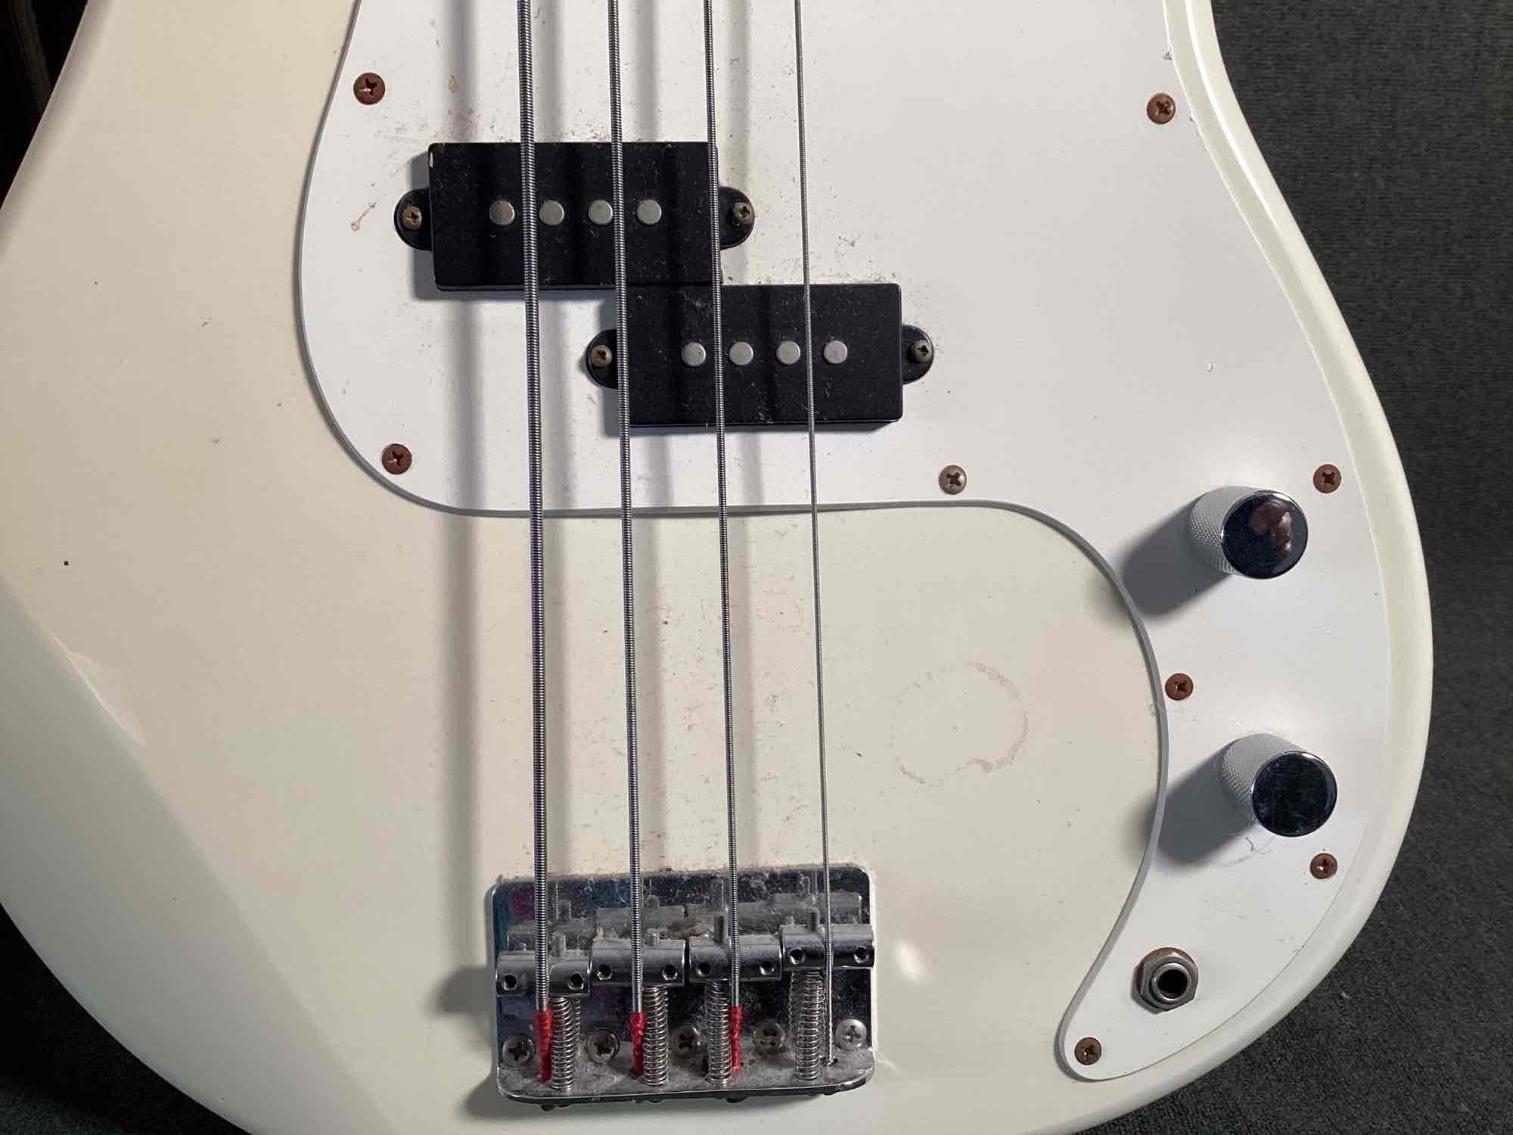 Image for Peavy bass Guitar with Amp